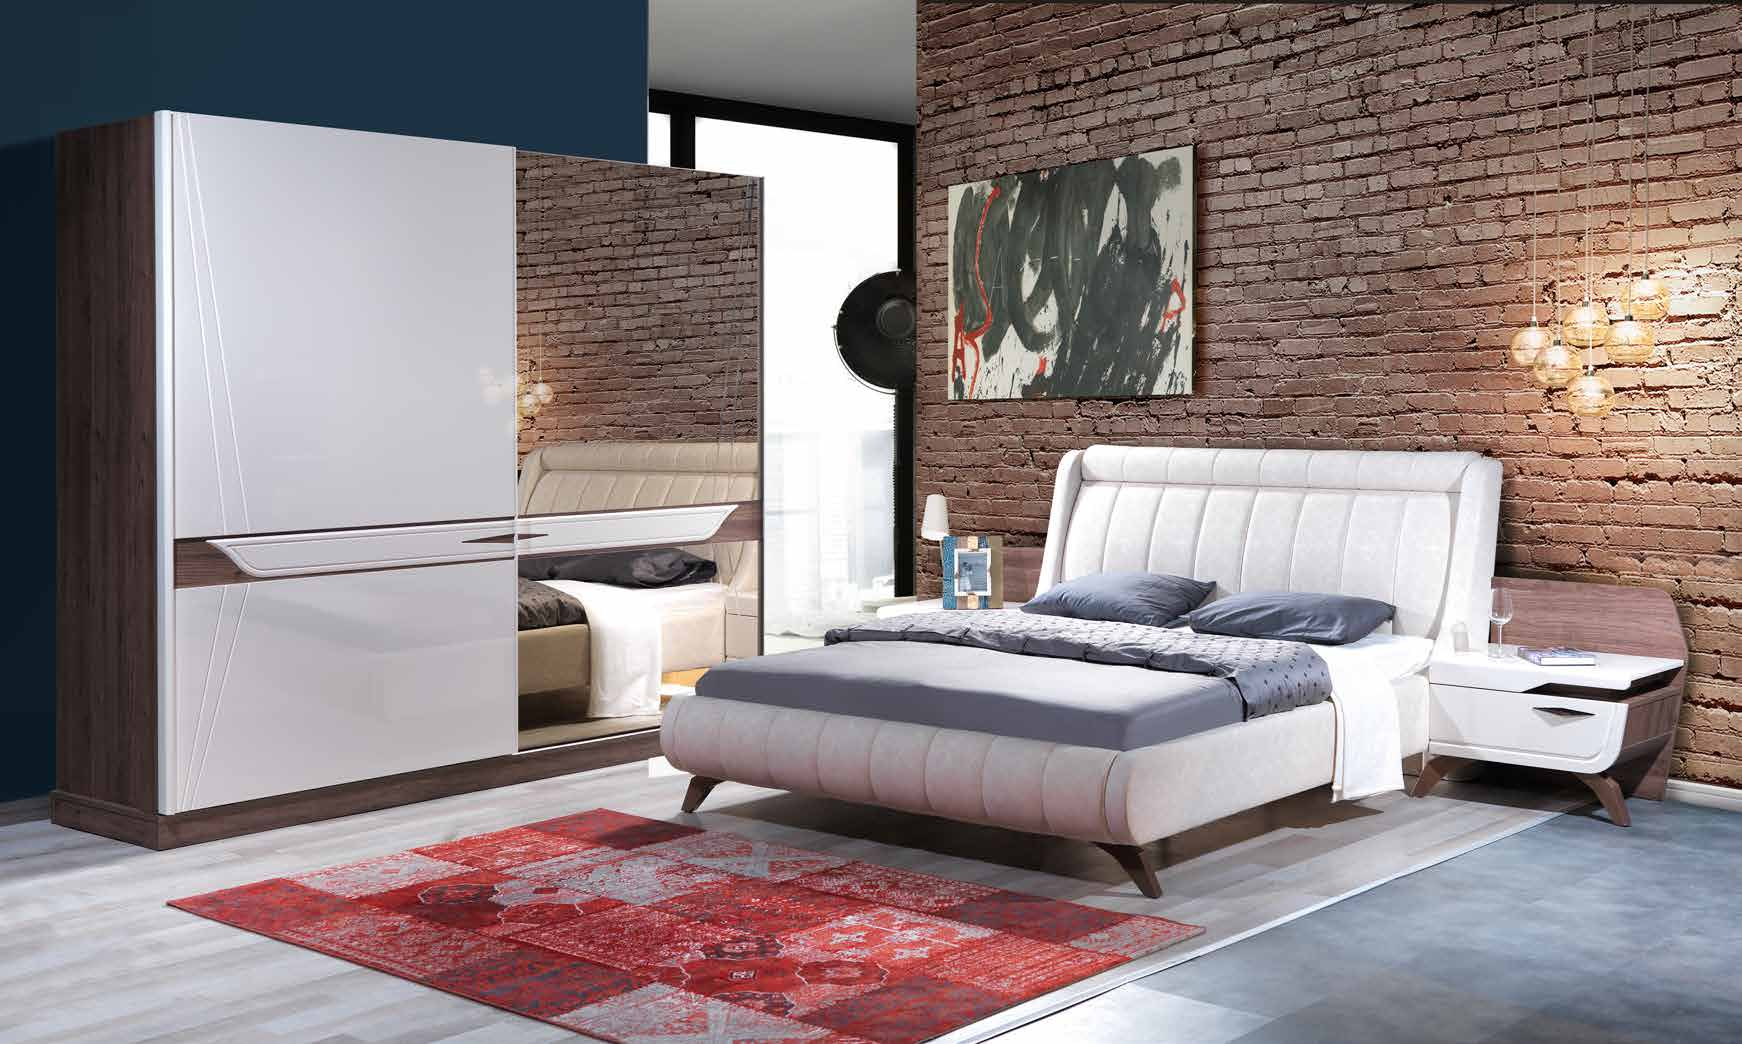 BUGATTI I love simplicity and basic forms. Relaxation is extremely important to me. My ideal bed is a solid part of the home, suitable for any situation, from rest and regeneration to entertainment.